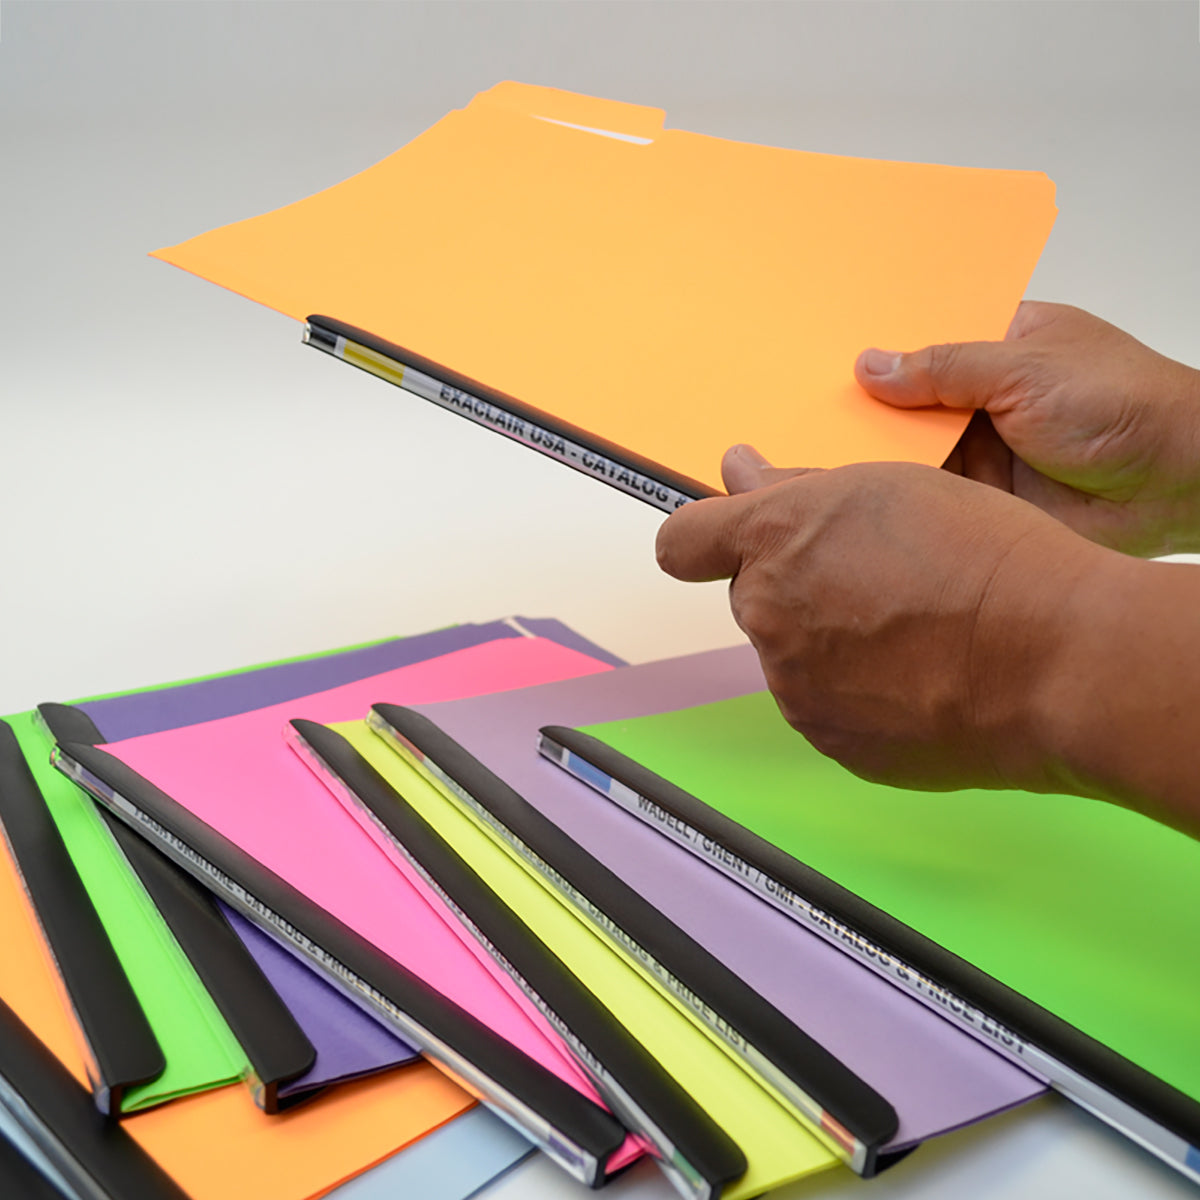 Top 10 Best Office Supplies to Stay Organized Anywhere - Avery